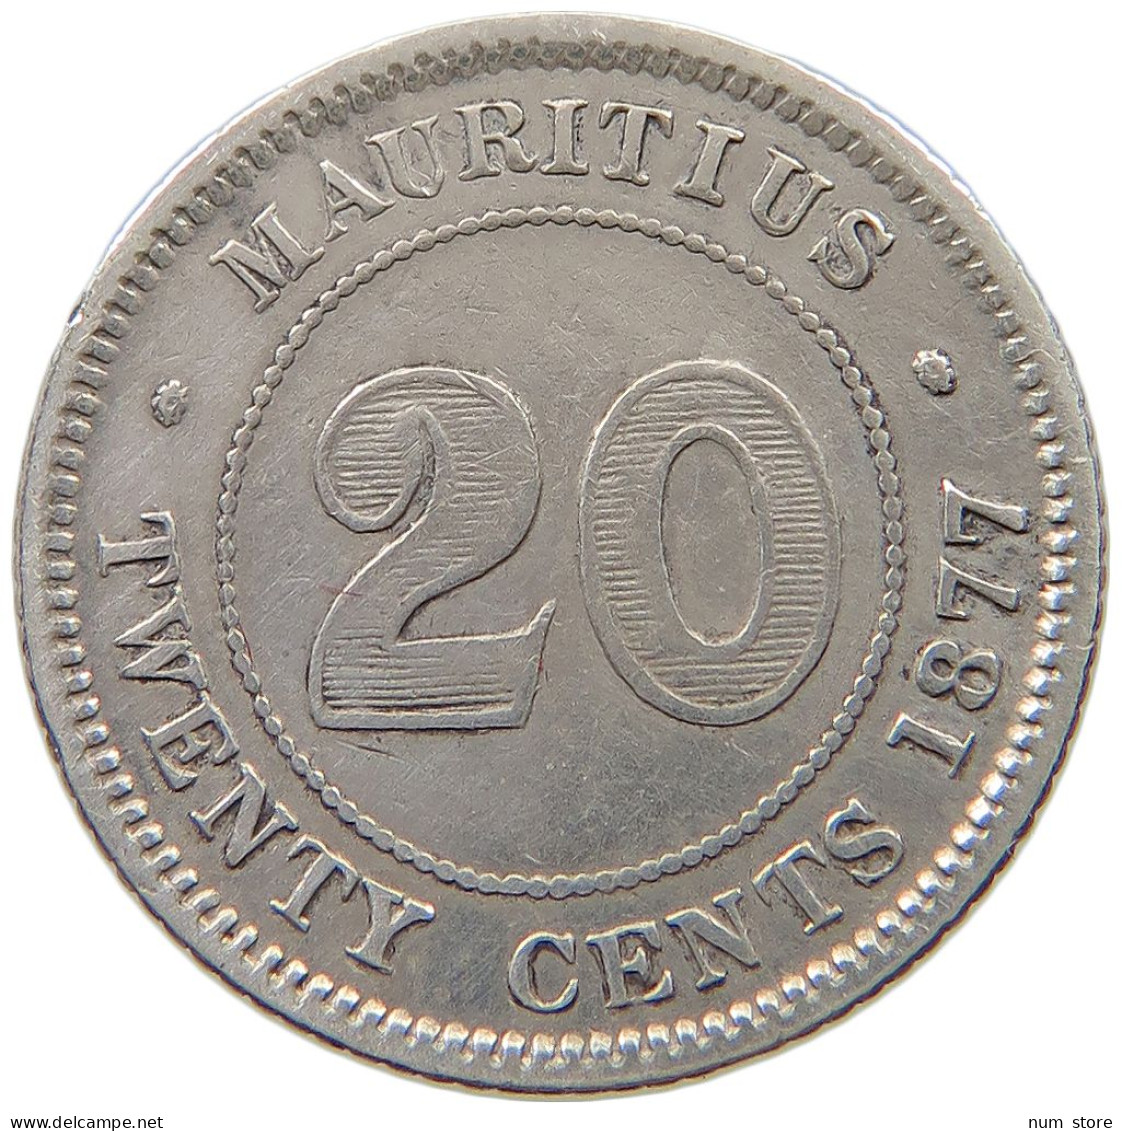 MAURITIUS 20 CENTS 1877 H Victoria 1837-1901 #t108 0117 - Maurice